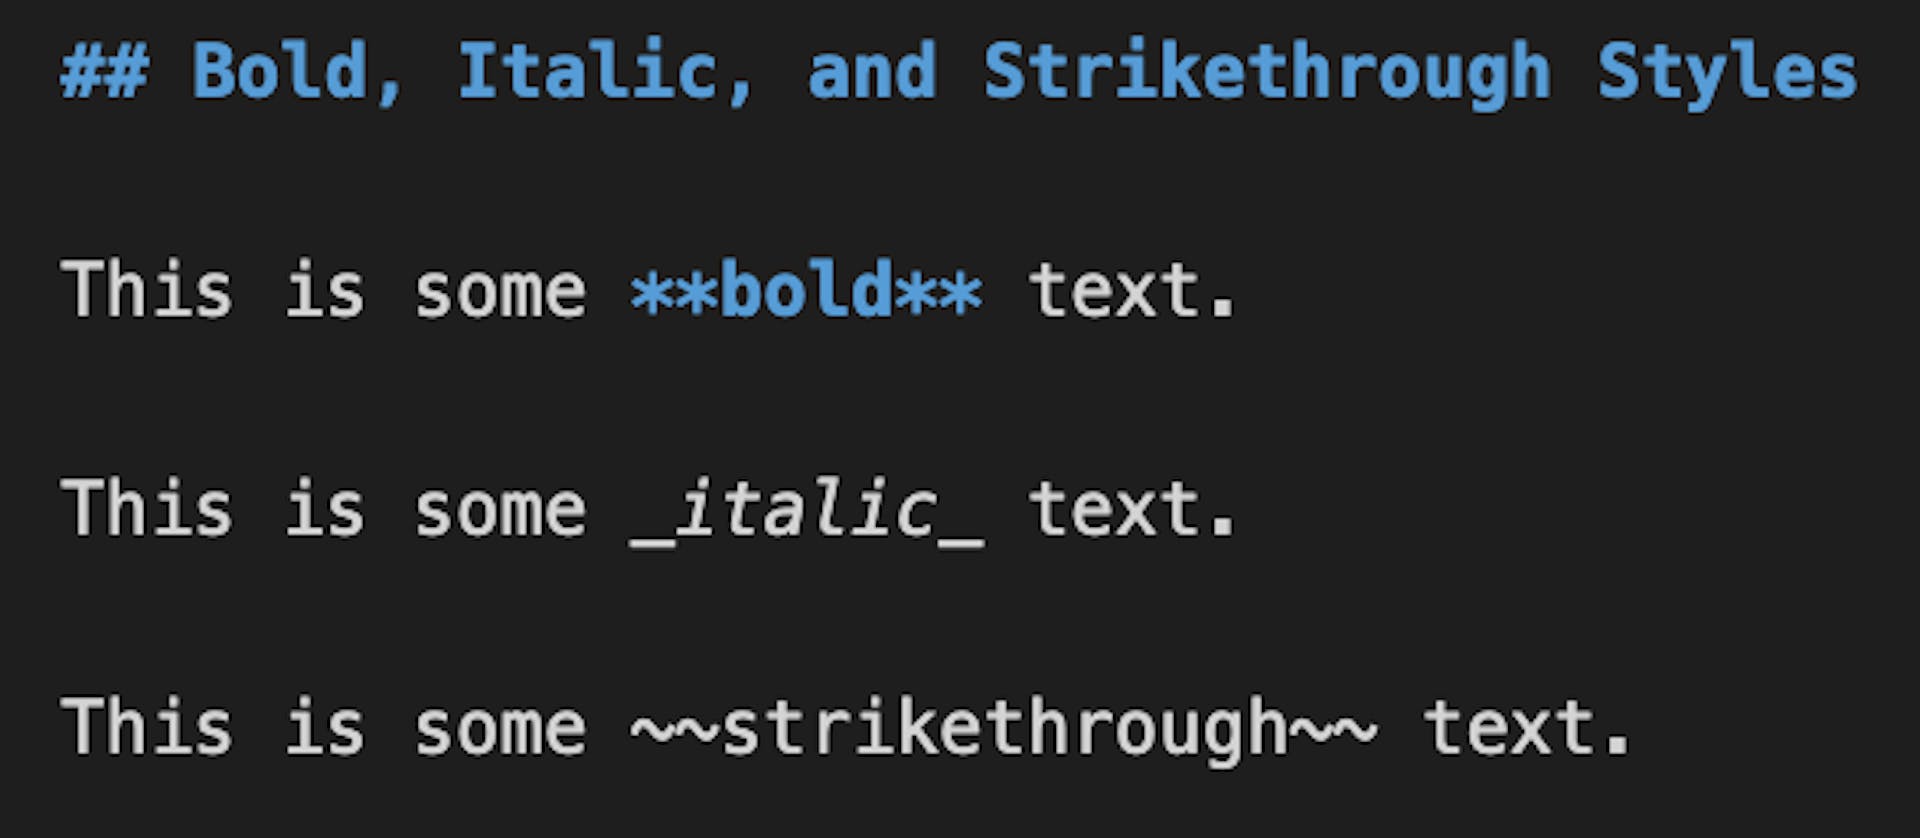 Markdown for bold, italic, and strikethrough text